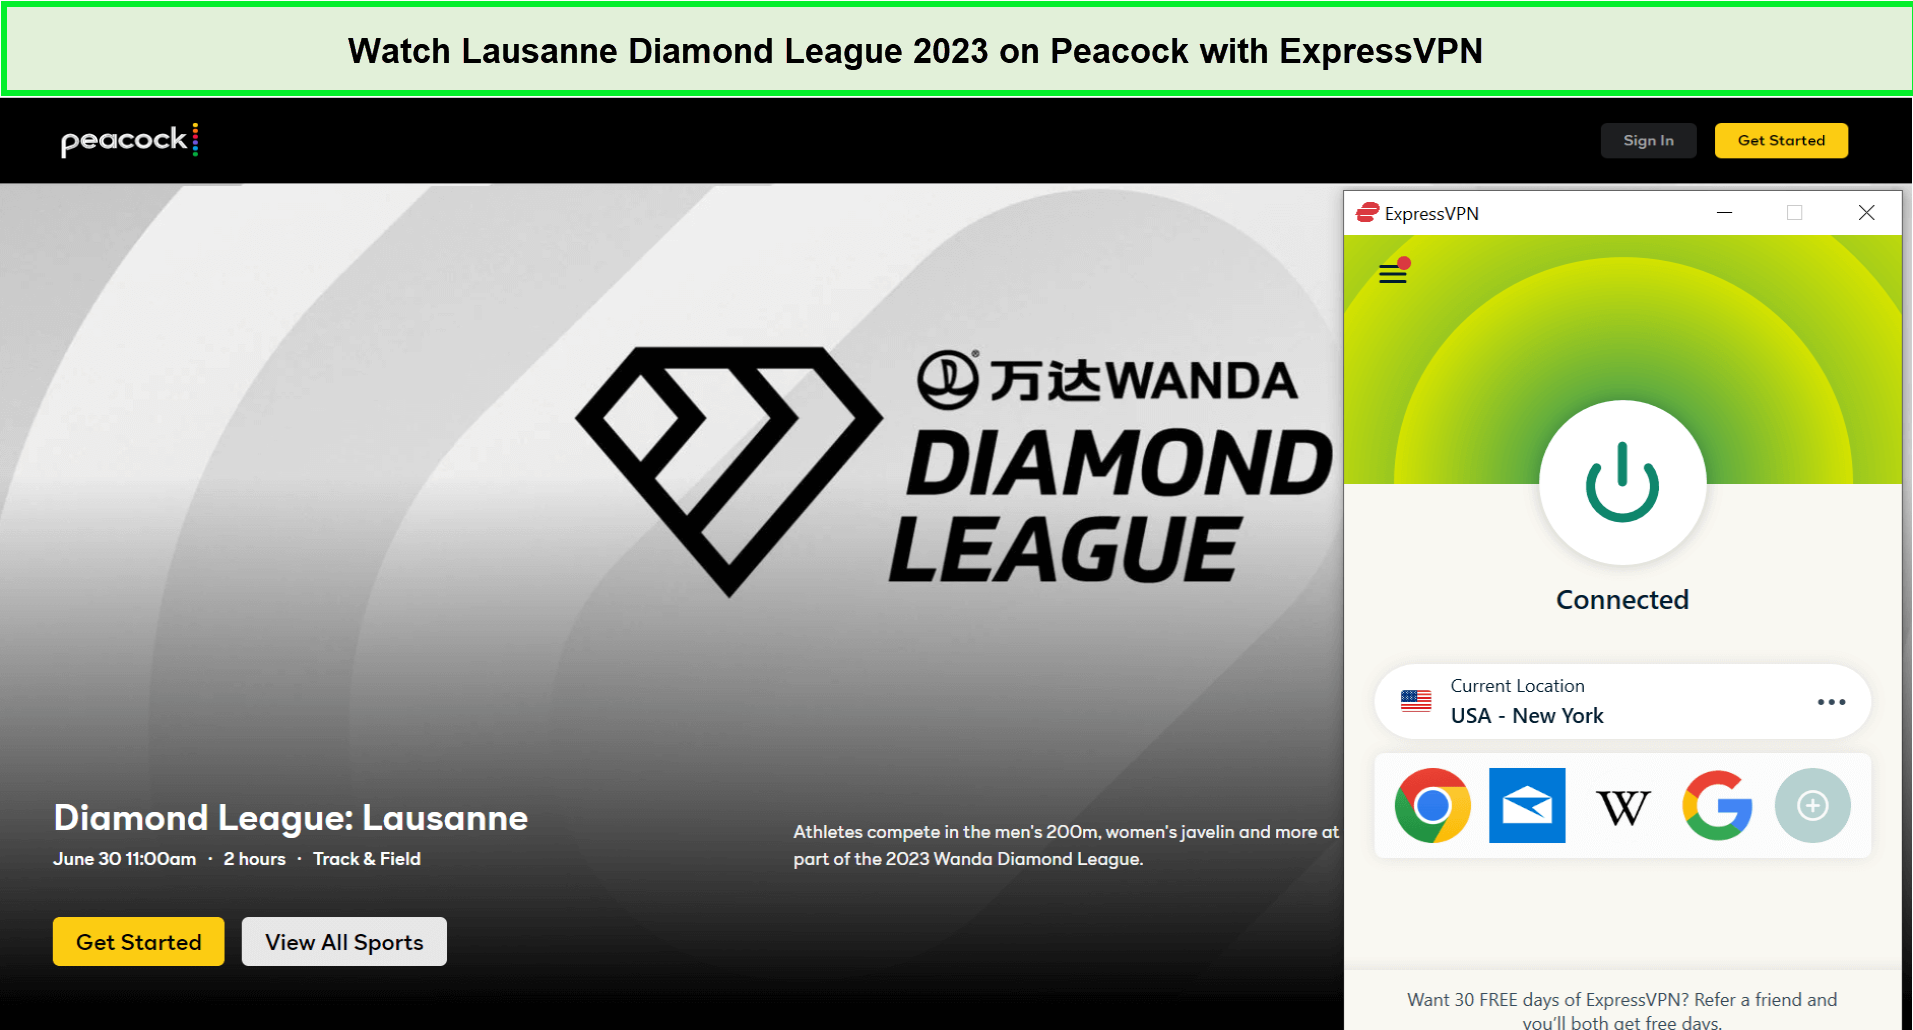 Watch-Lausanne-Diamond-League-2023-in-India-on-Peacock-with-ExpressVPN